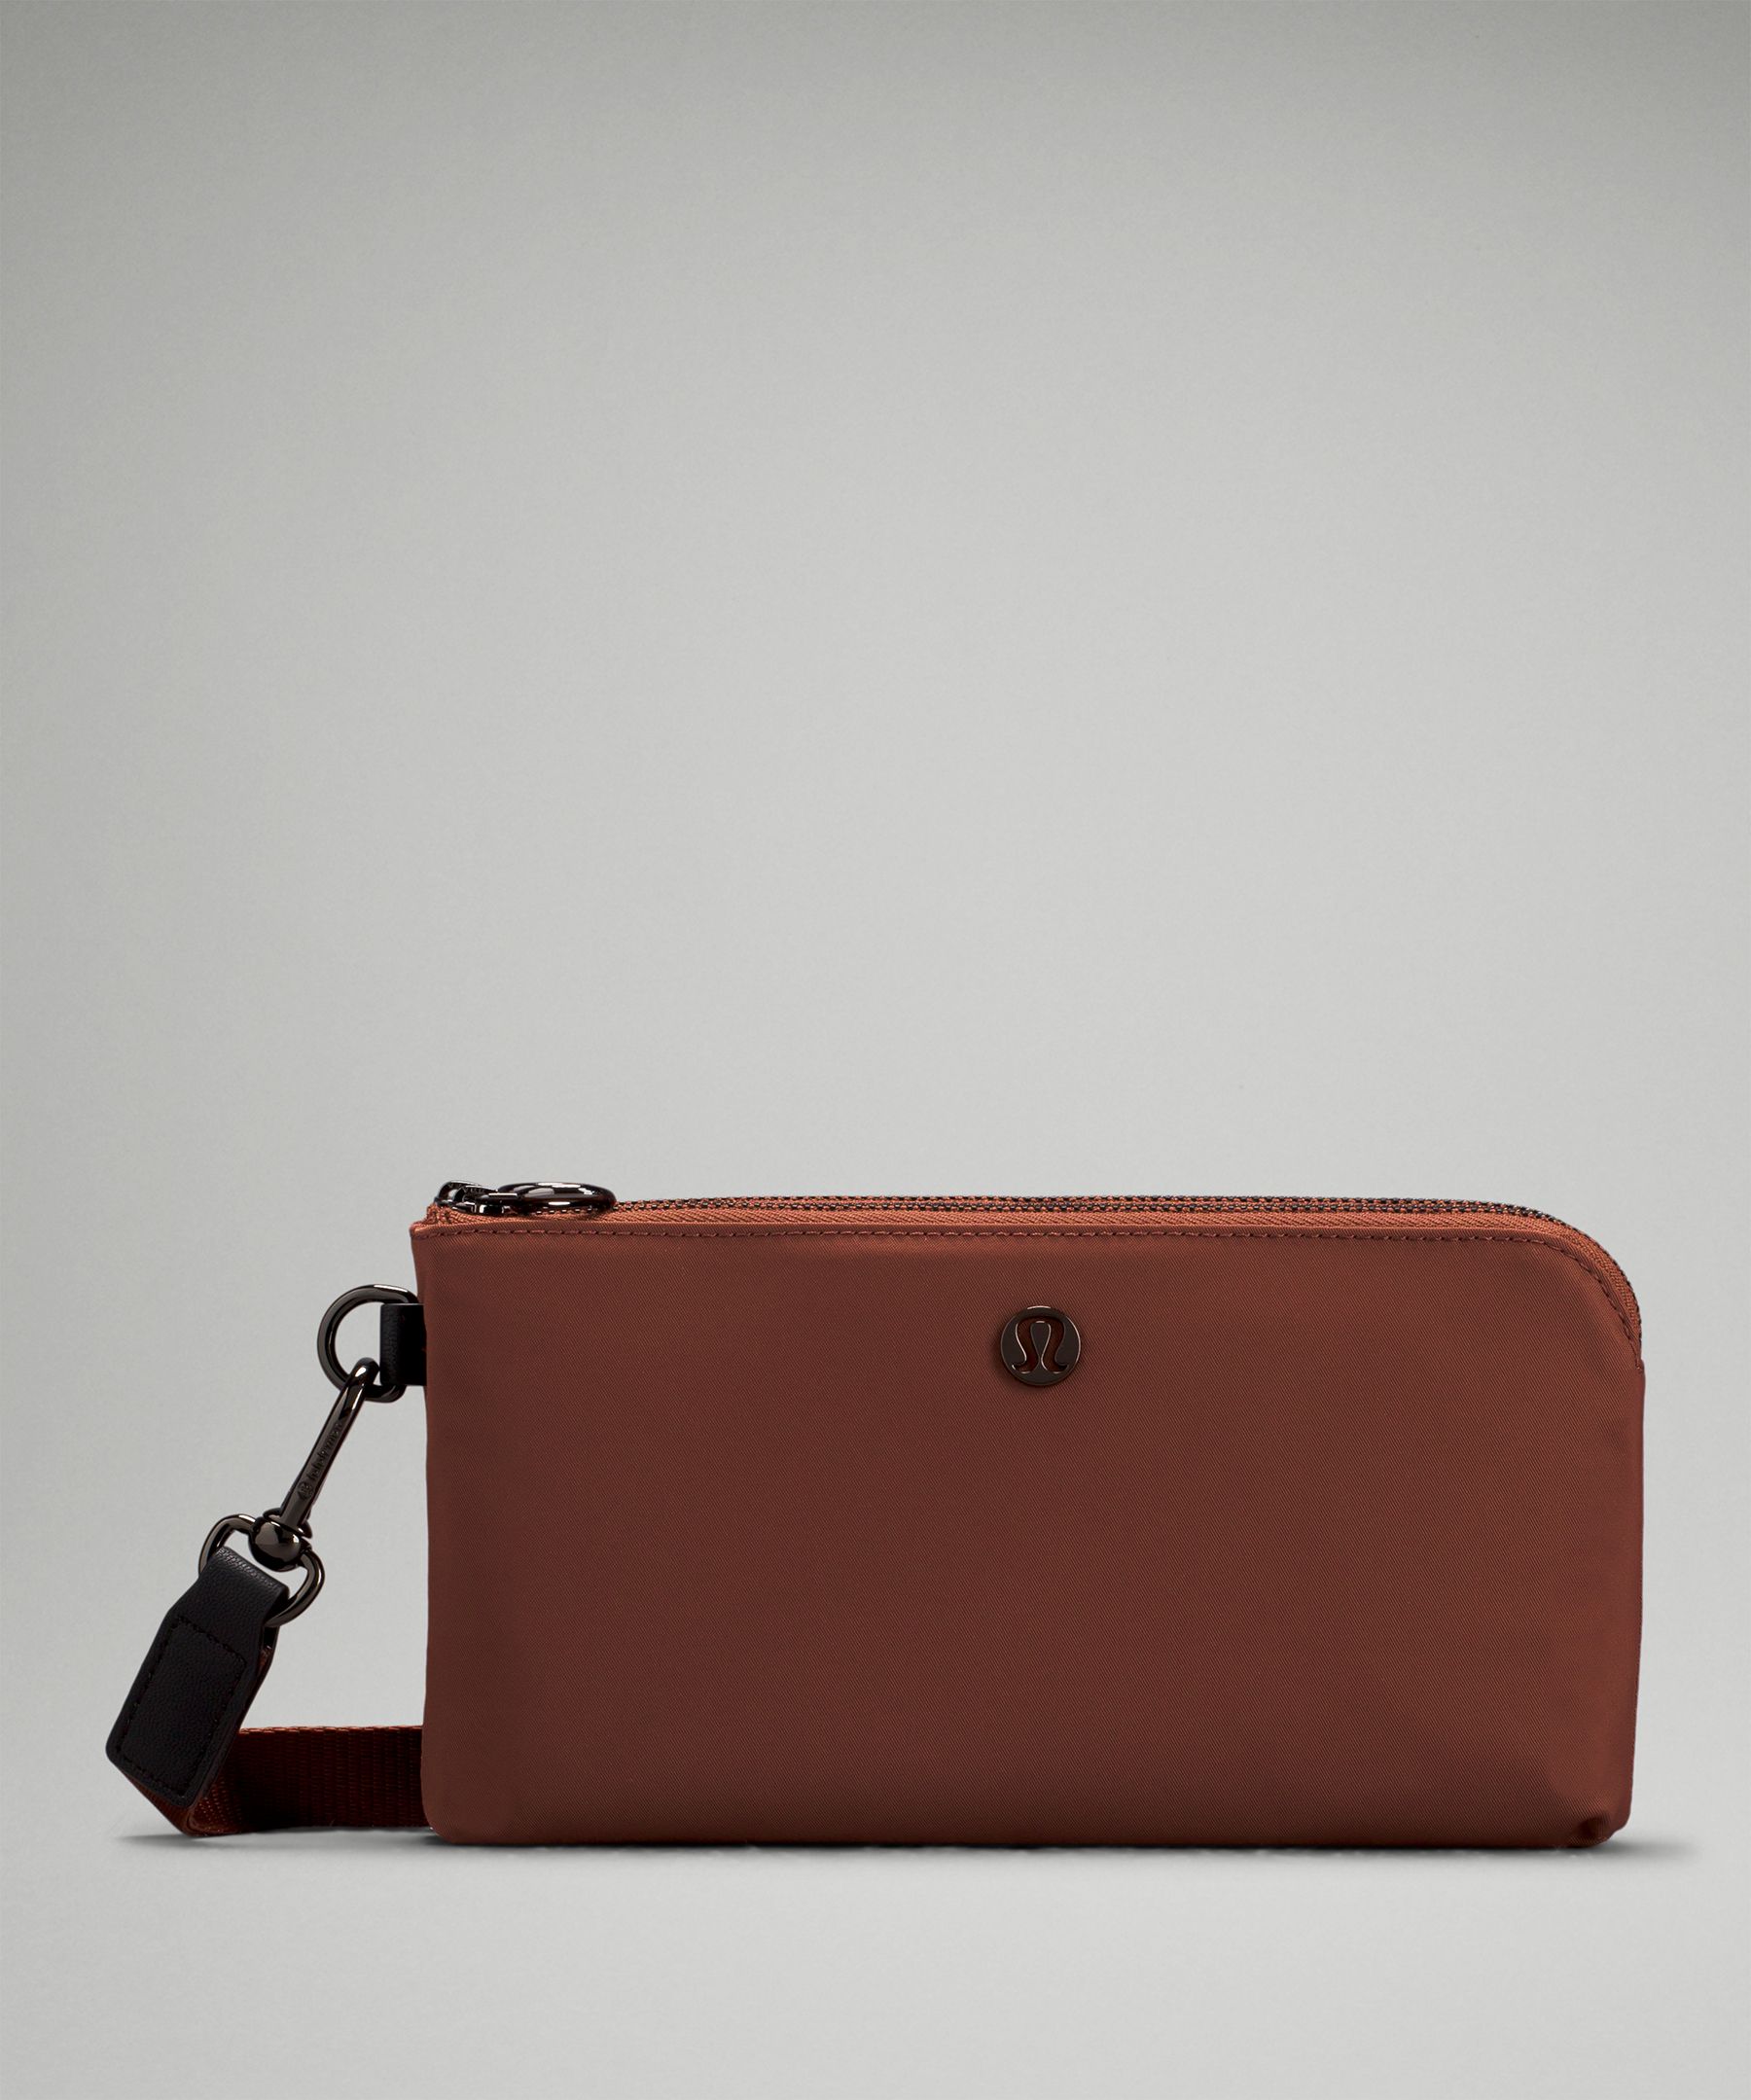 Lululemon Curved Wristlet In Ancient Copper